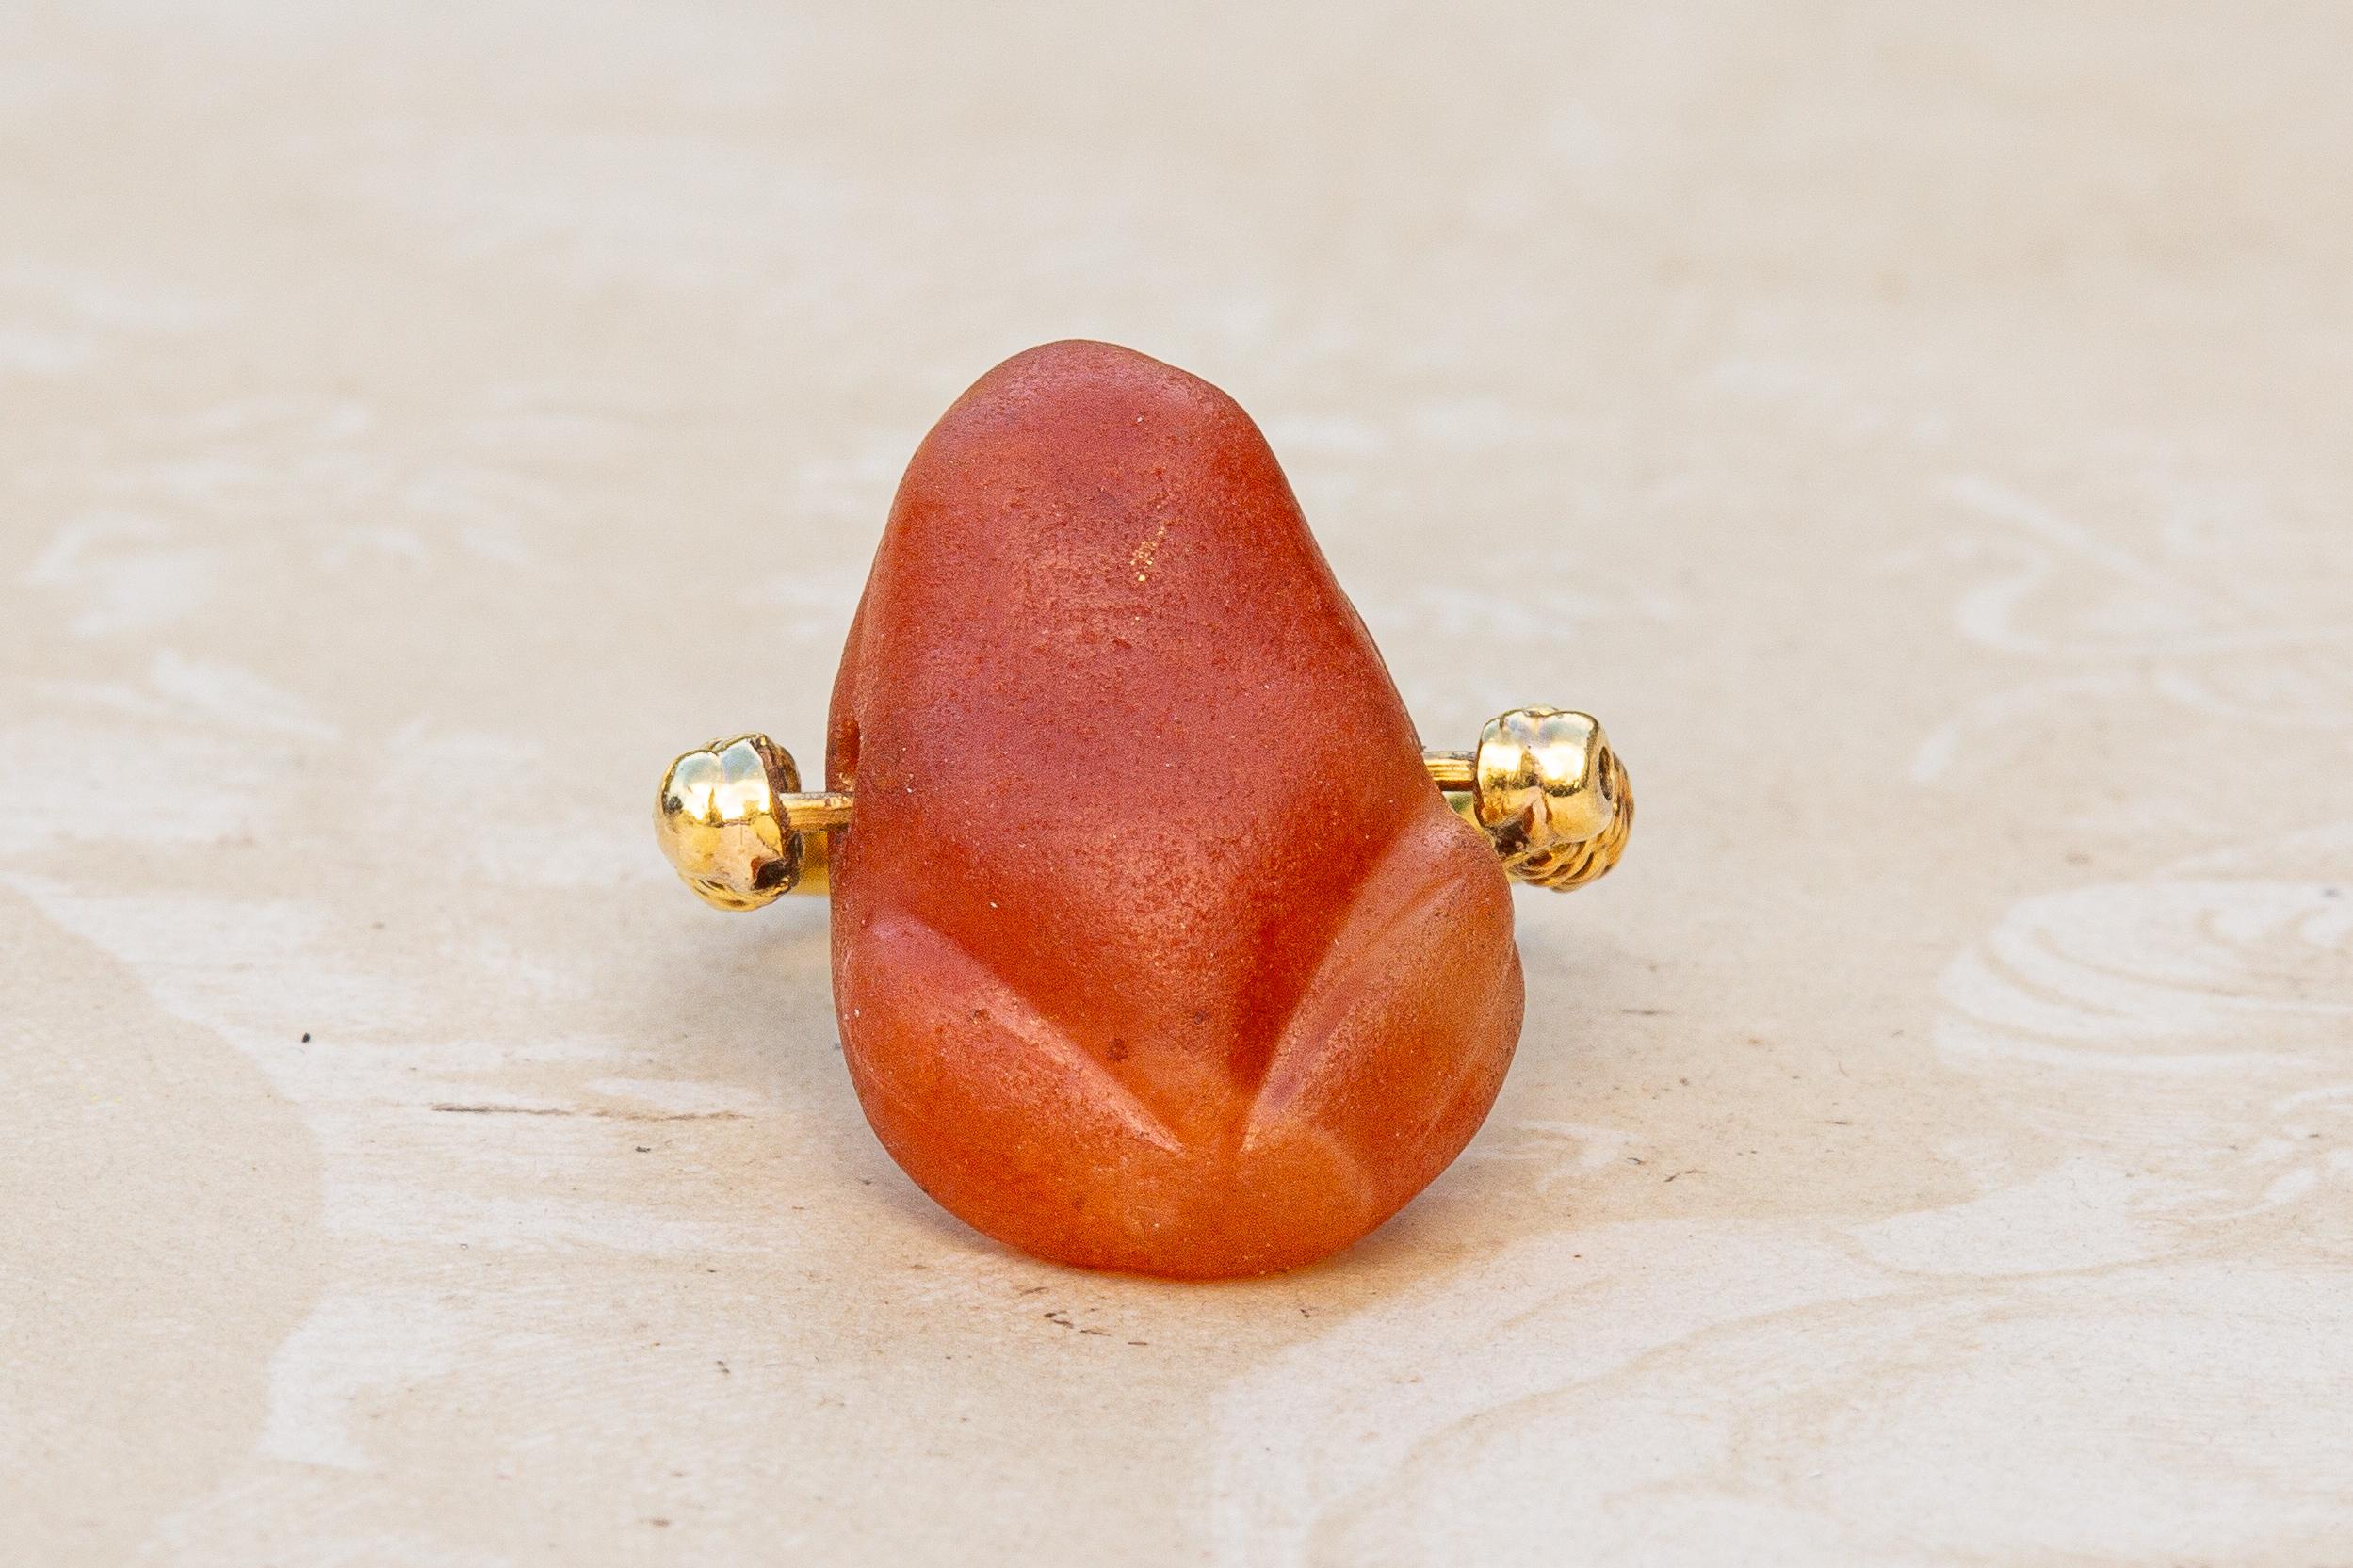 This rare Egyptian carved carnelian frog amulet dates to the Eighteenth Dynasty of the New Kingdom, circa 1300 BC. Frog amulets, depicting the goddess Heket, were commonly worn by both the living as a fertility charm and the dead to provide